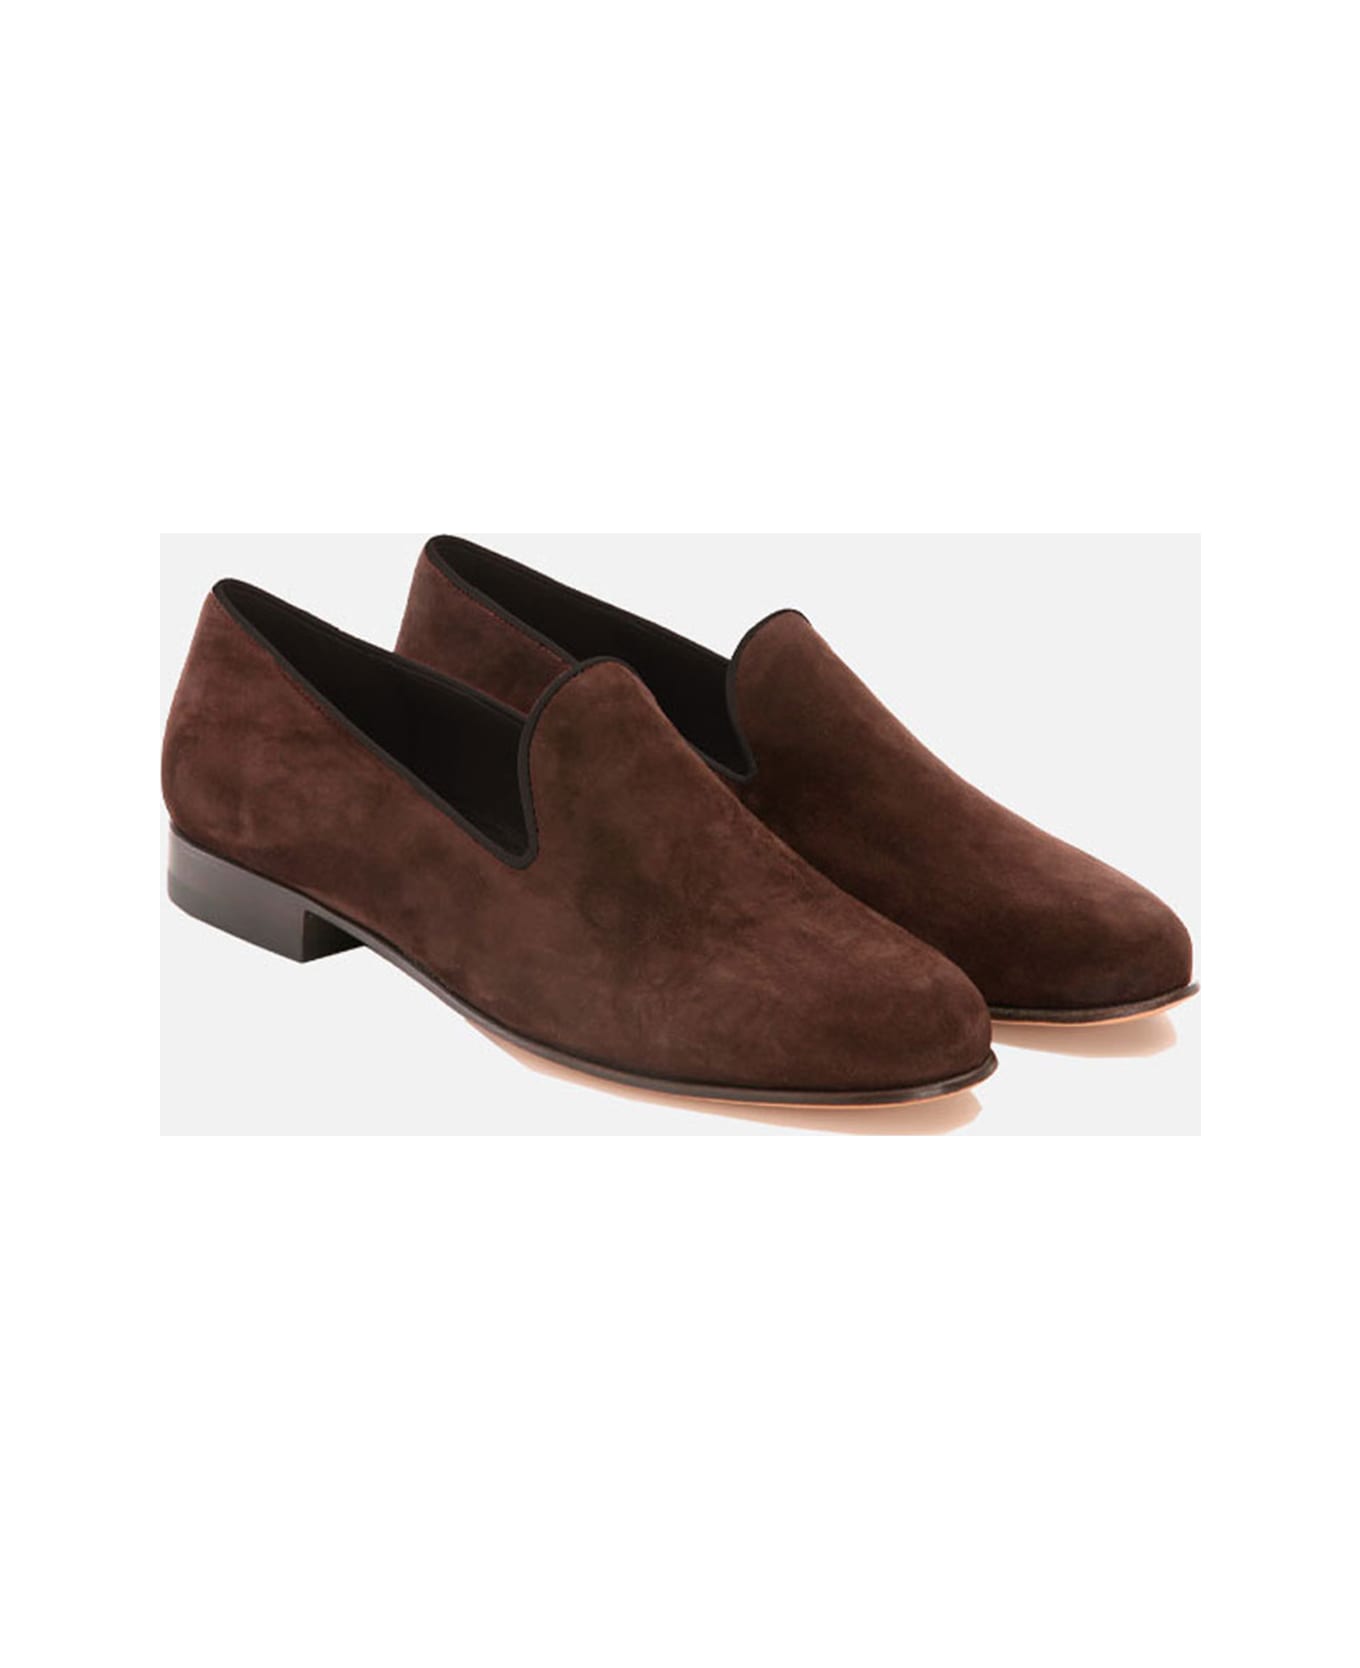 CB Made in Italy Suede Flats Positano - Brown